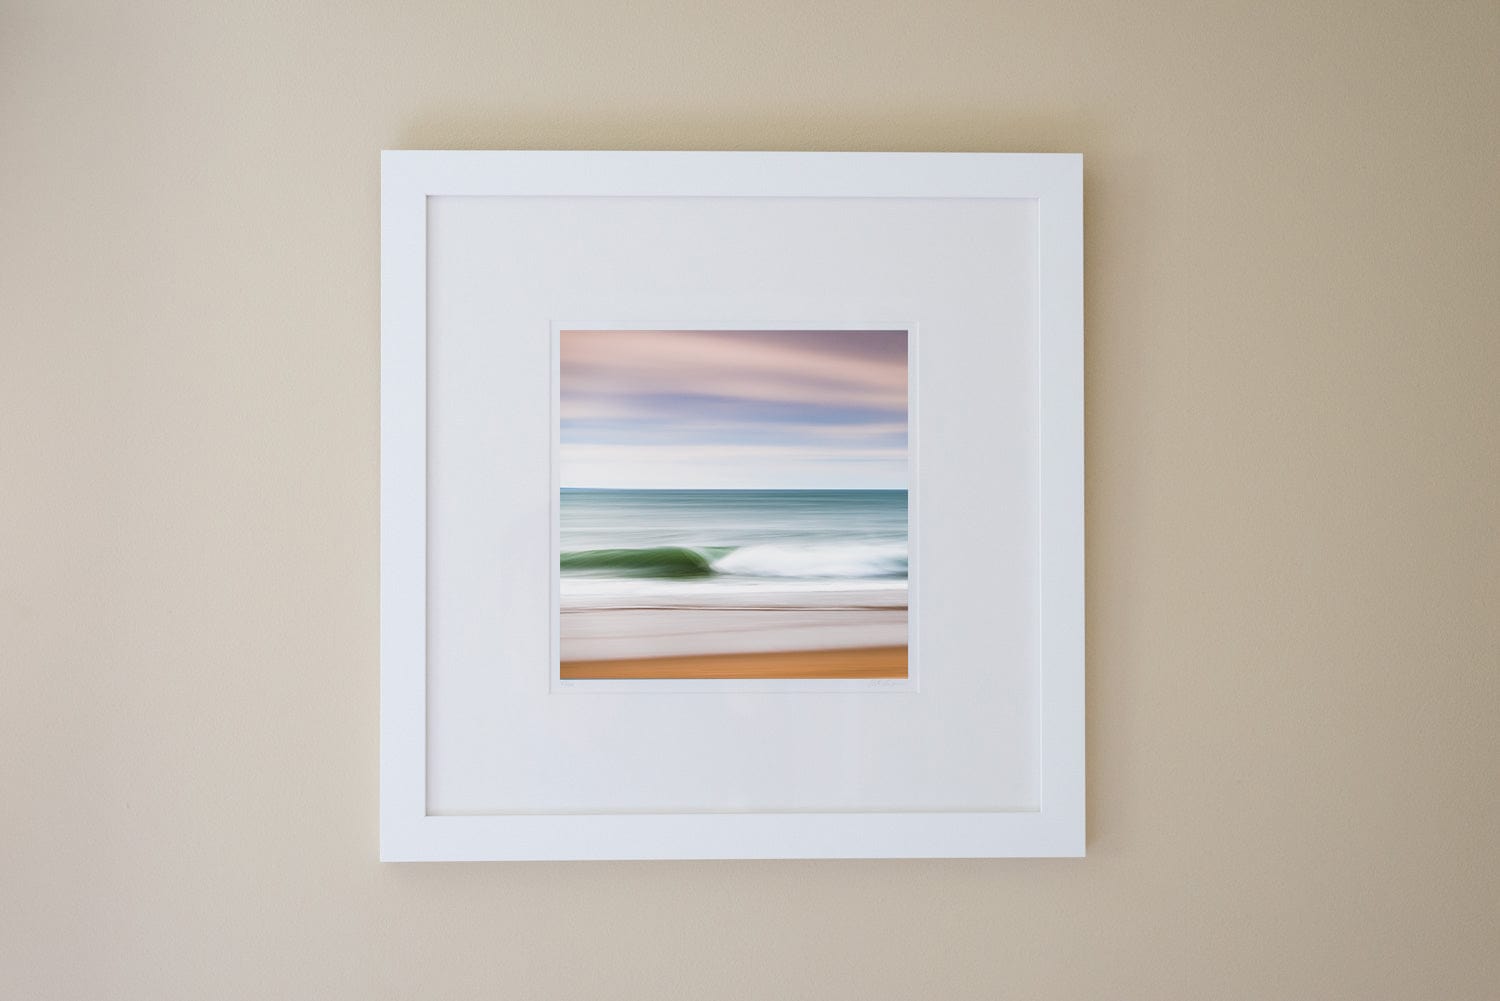 Cate Brown Photo East Beach Abstract #3 // Framed Fine Art 20x20" // Limited Edition 3 of 100 Available Inventory Ocean Fine Art